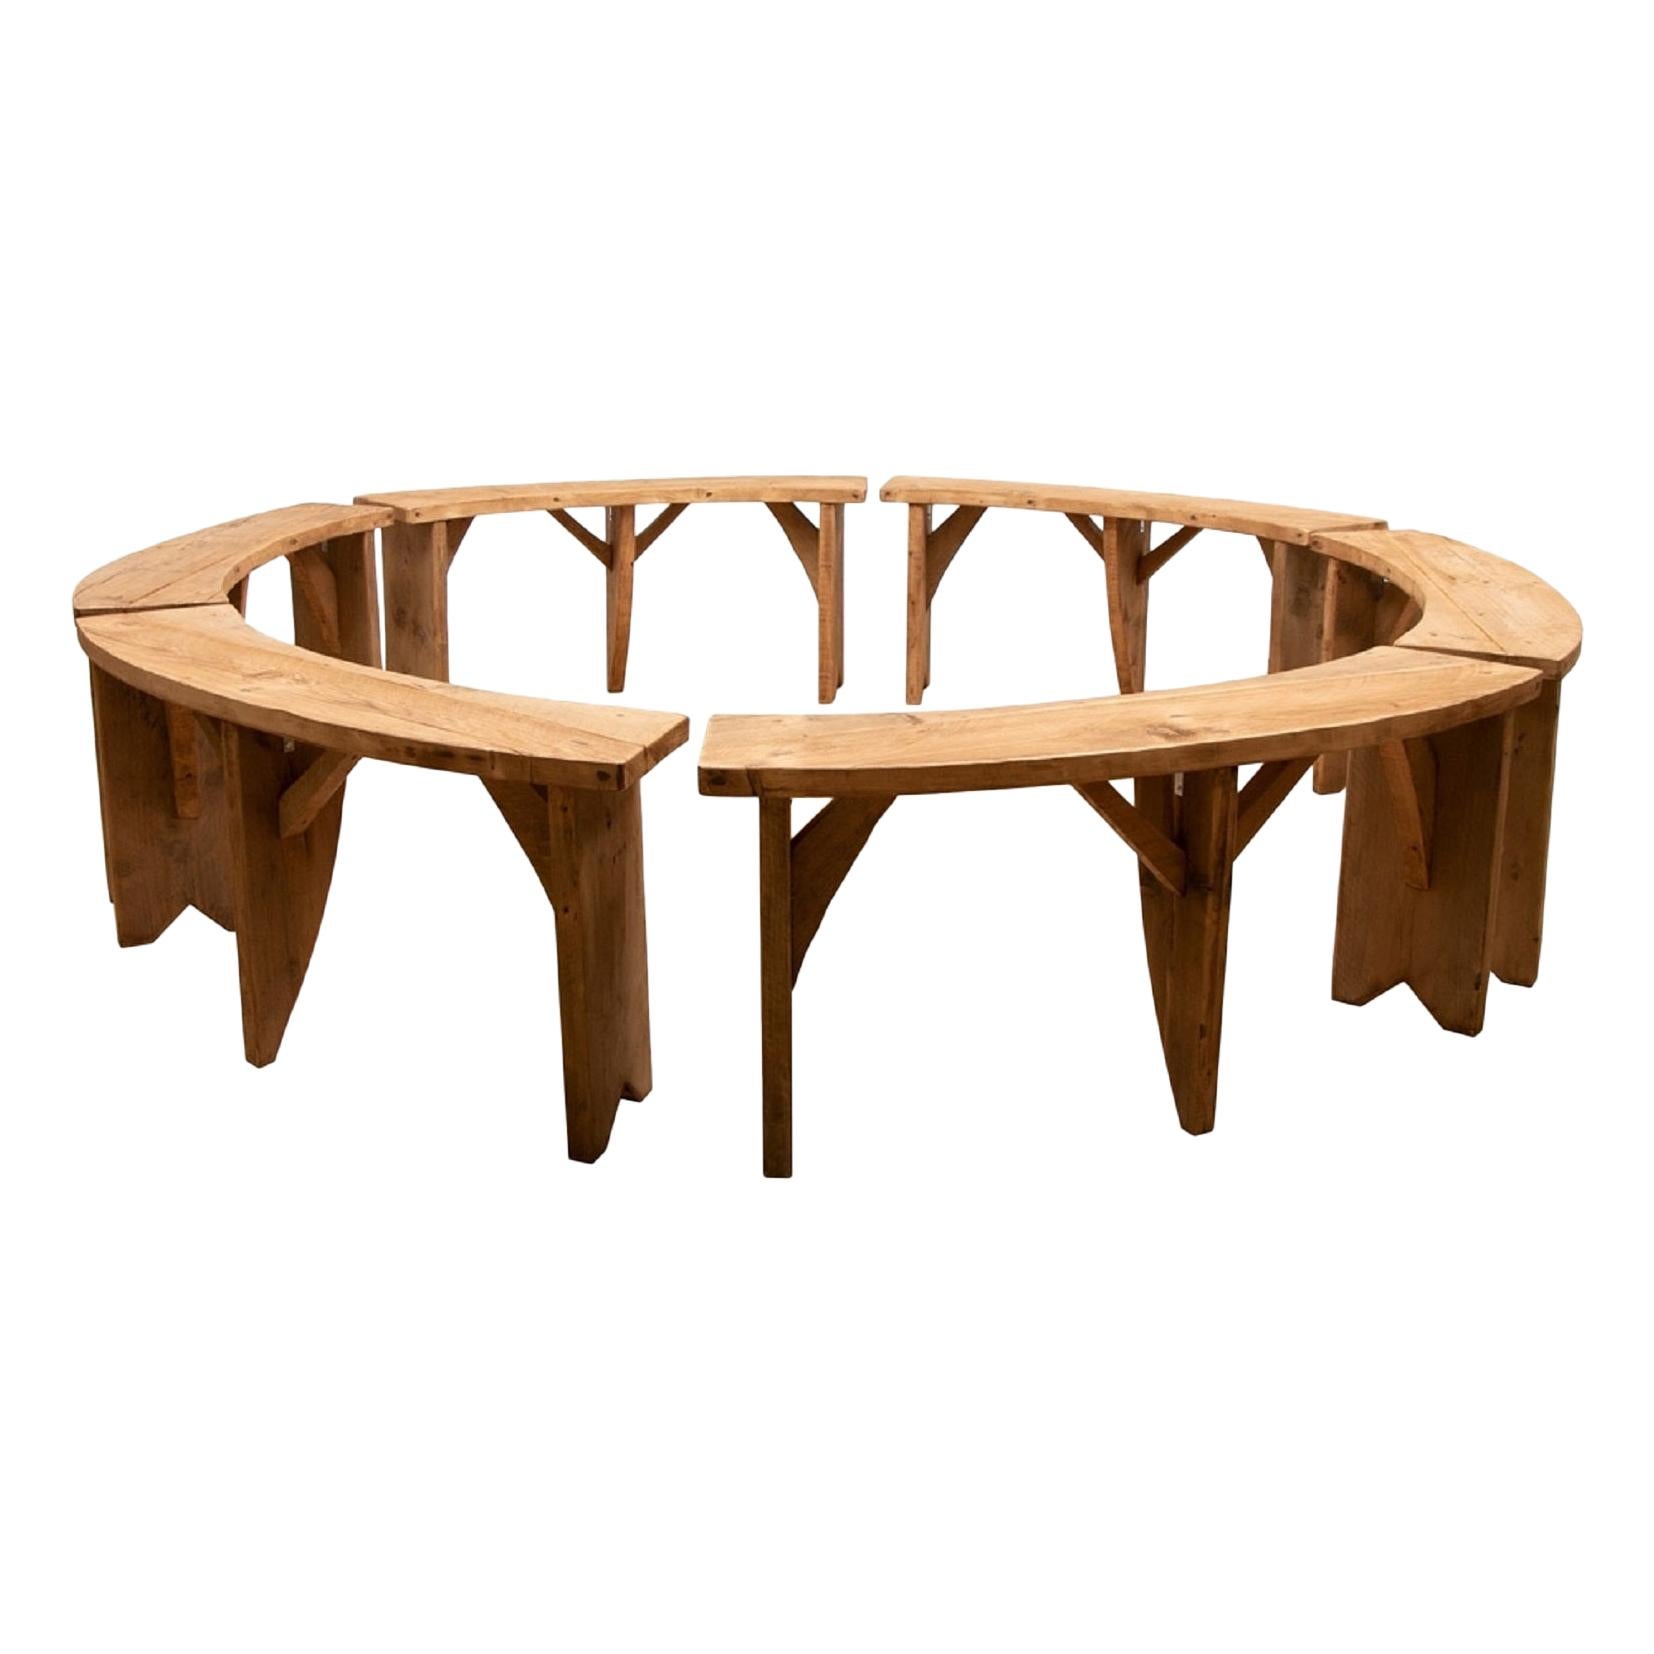 Set of 6 Circular Reclaimed Pine Benches, 20th Century For Sale